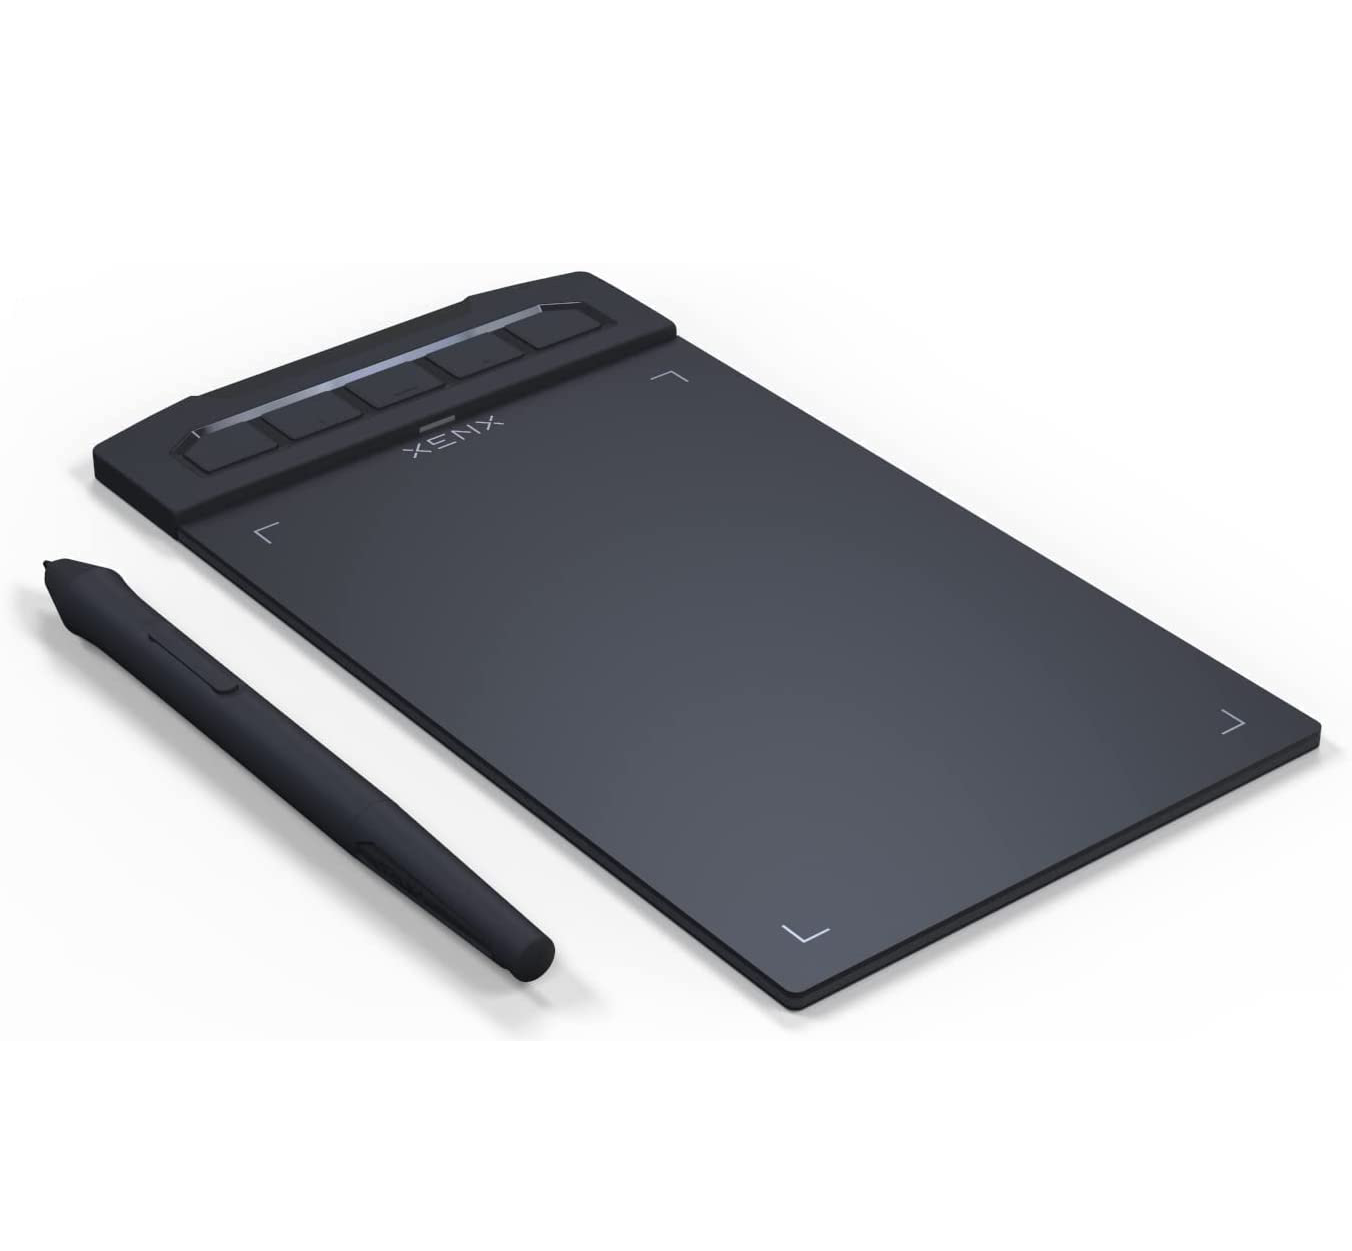 Xenx X1-640 Graphic Tablet